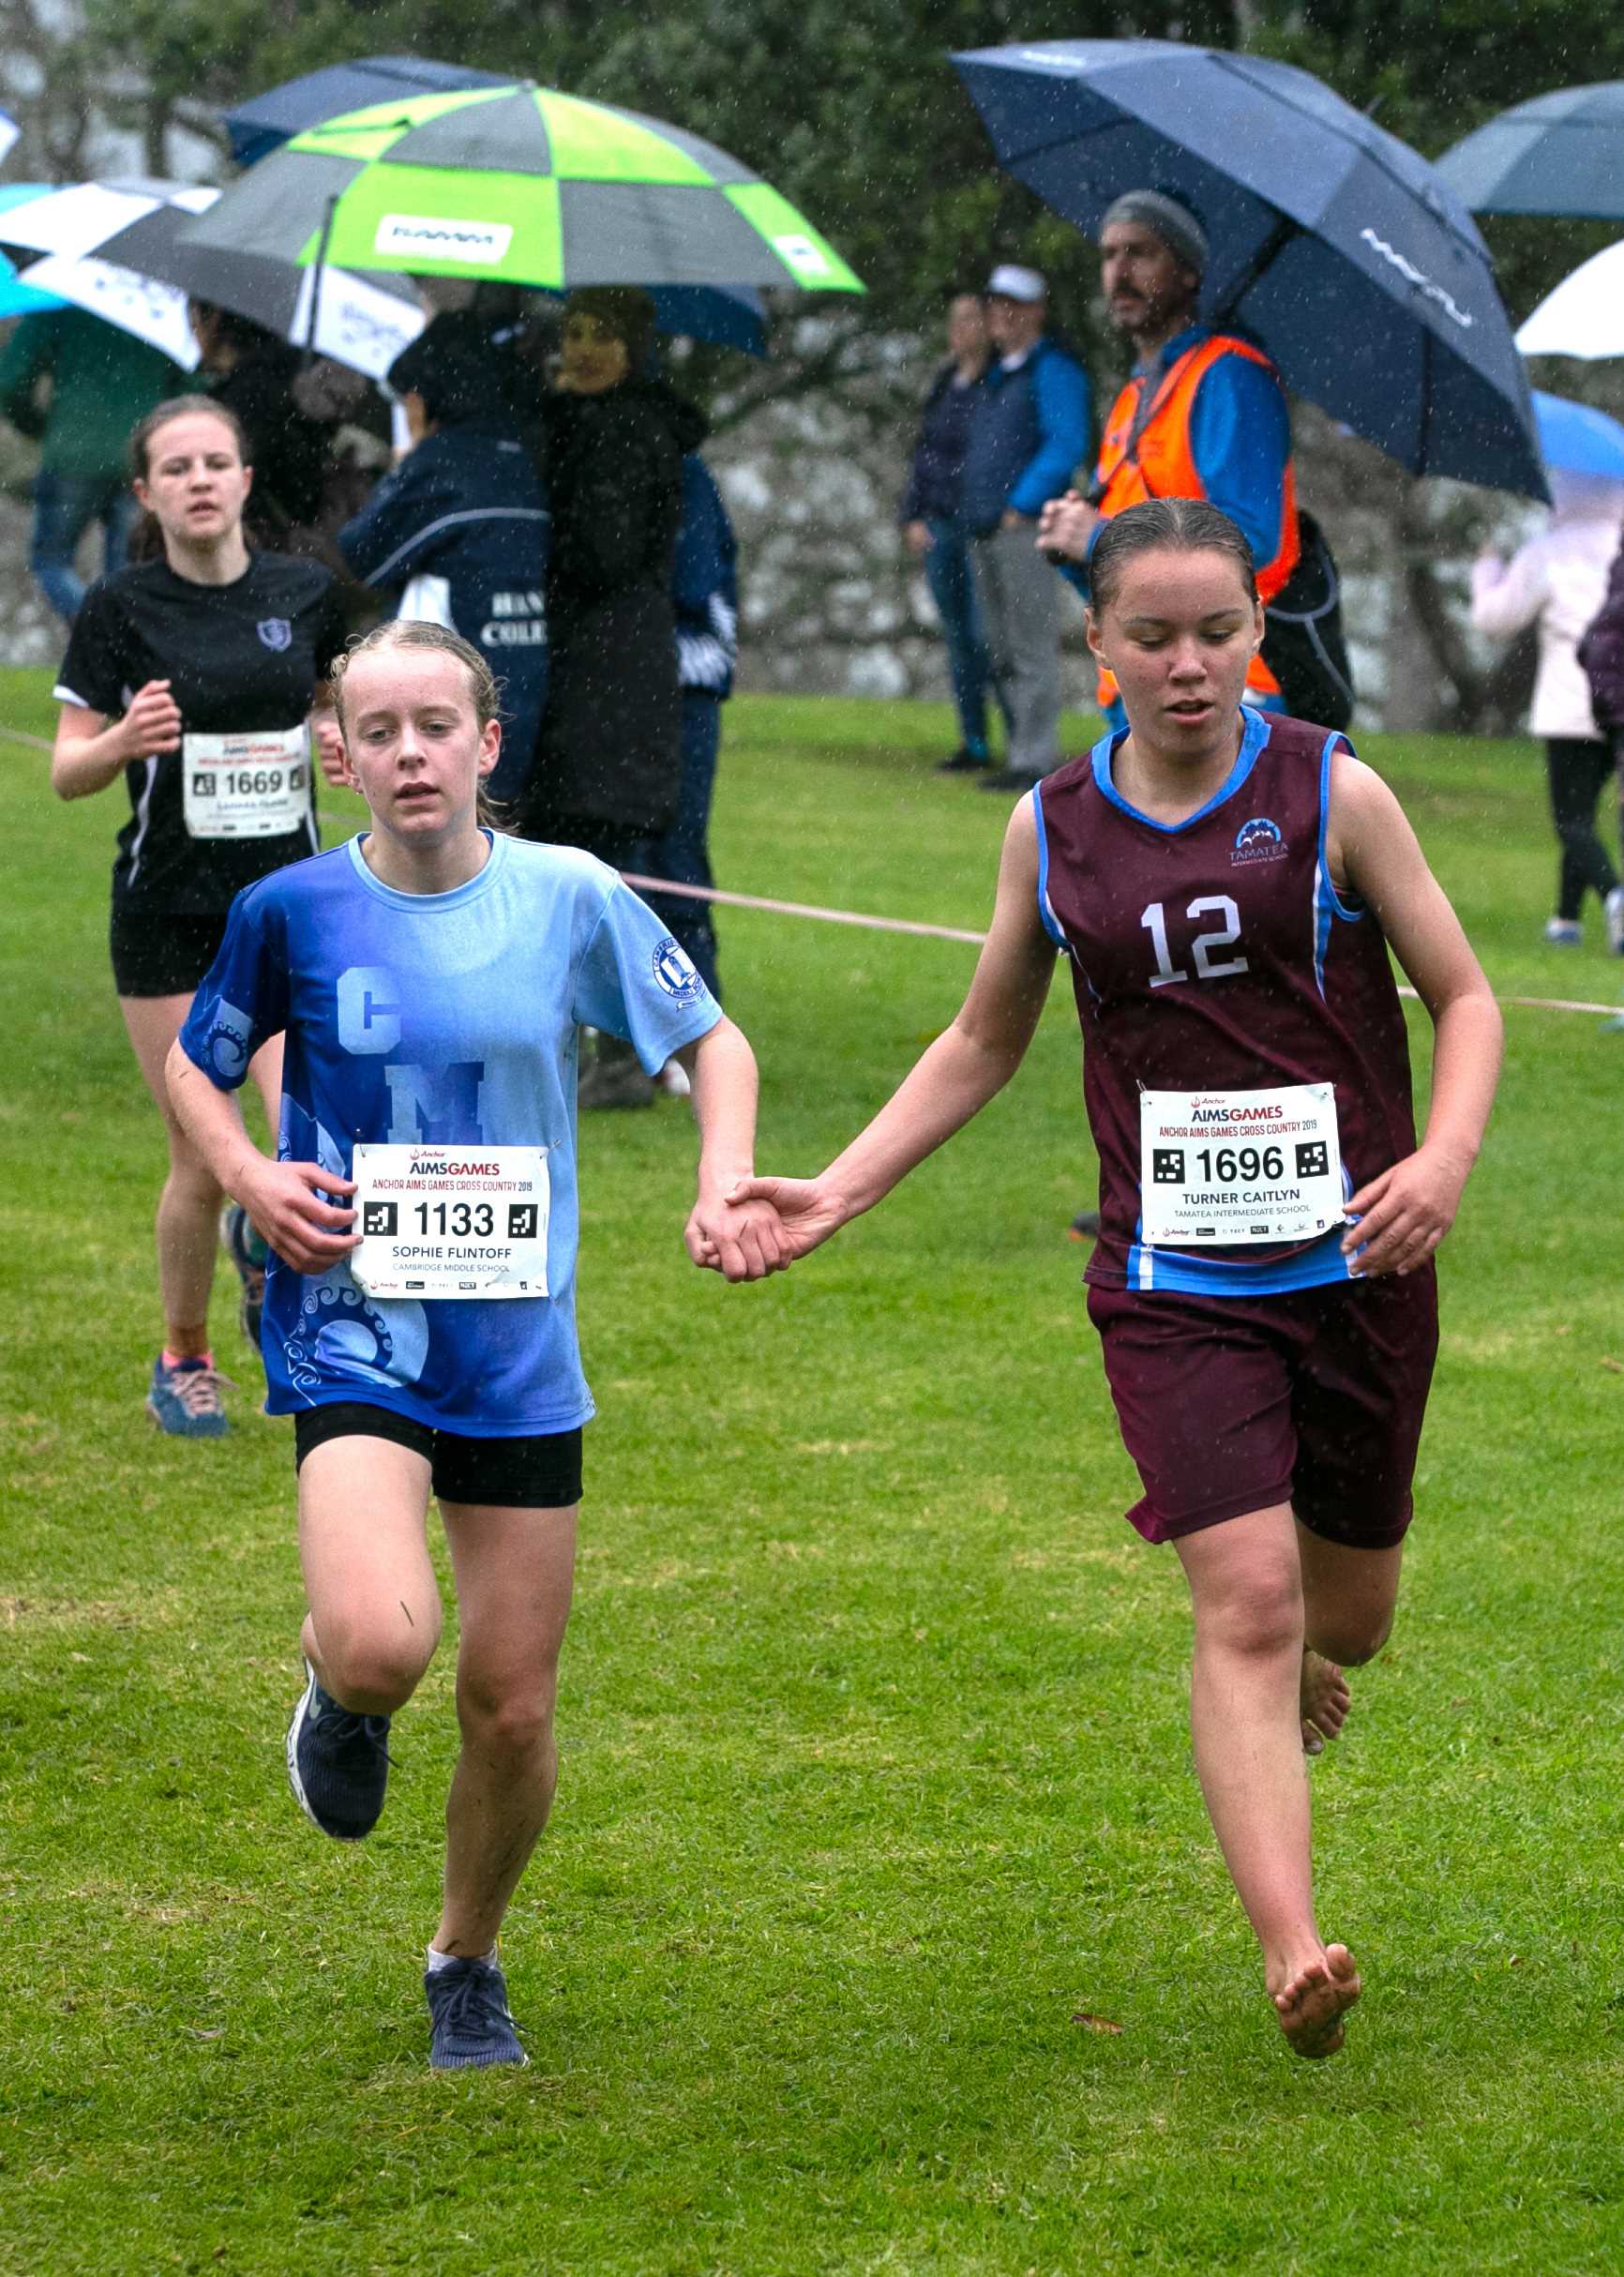 Action from the 2019 Anchor AIMS Games cross country event at Waipuna Park in Tauranga.